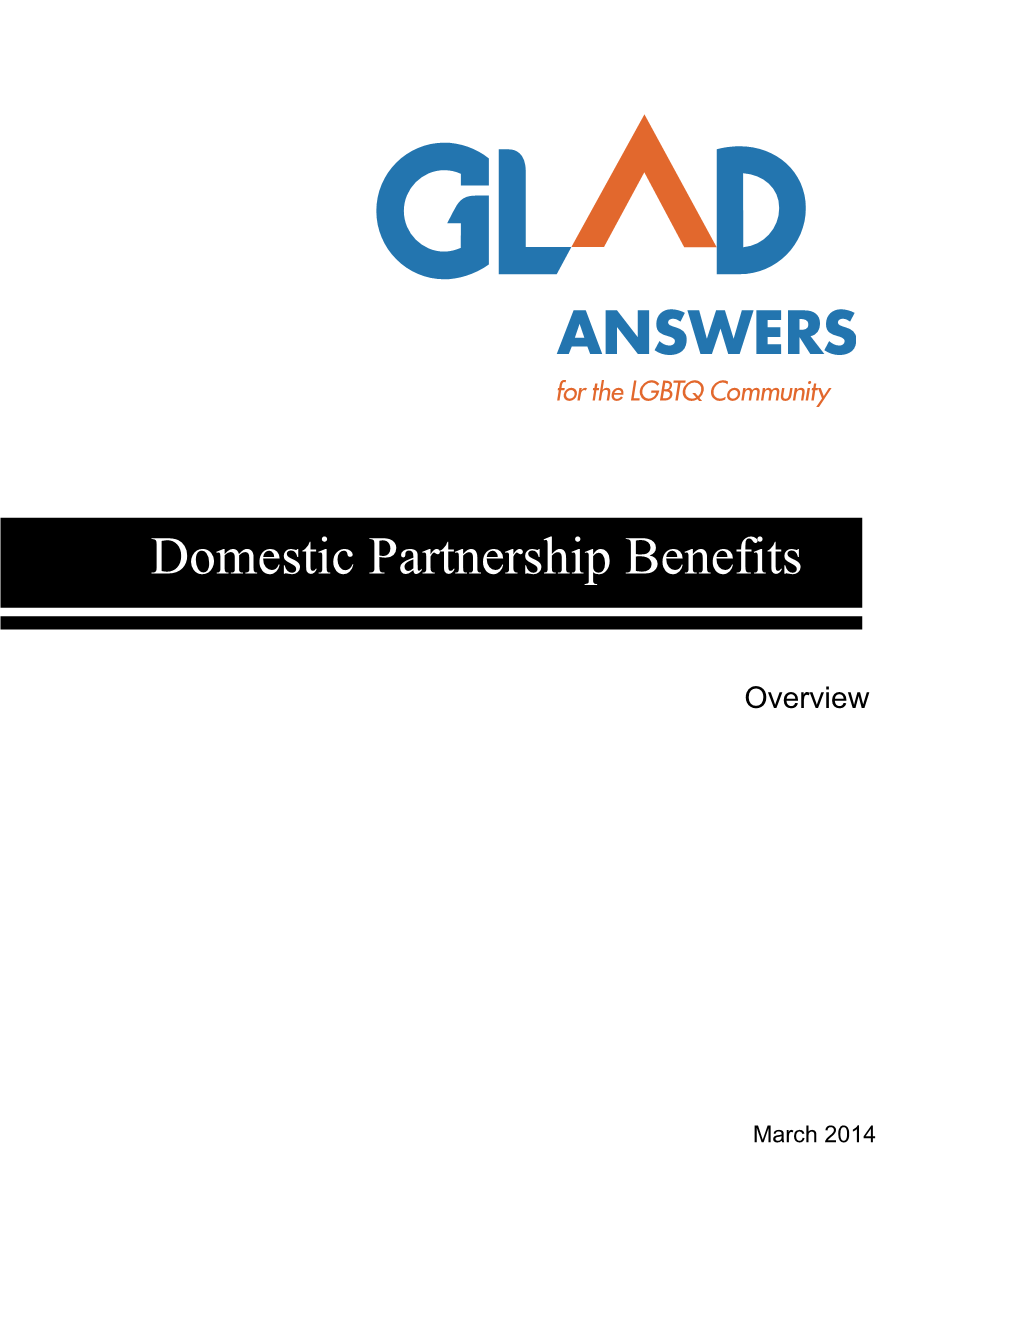 Domestic Partnership Benefits Overview